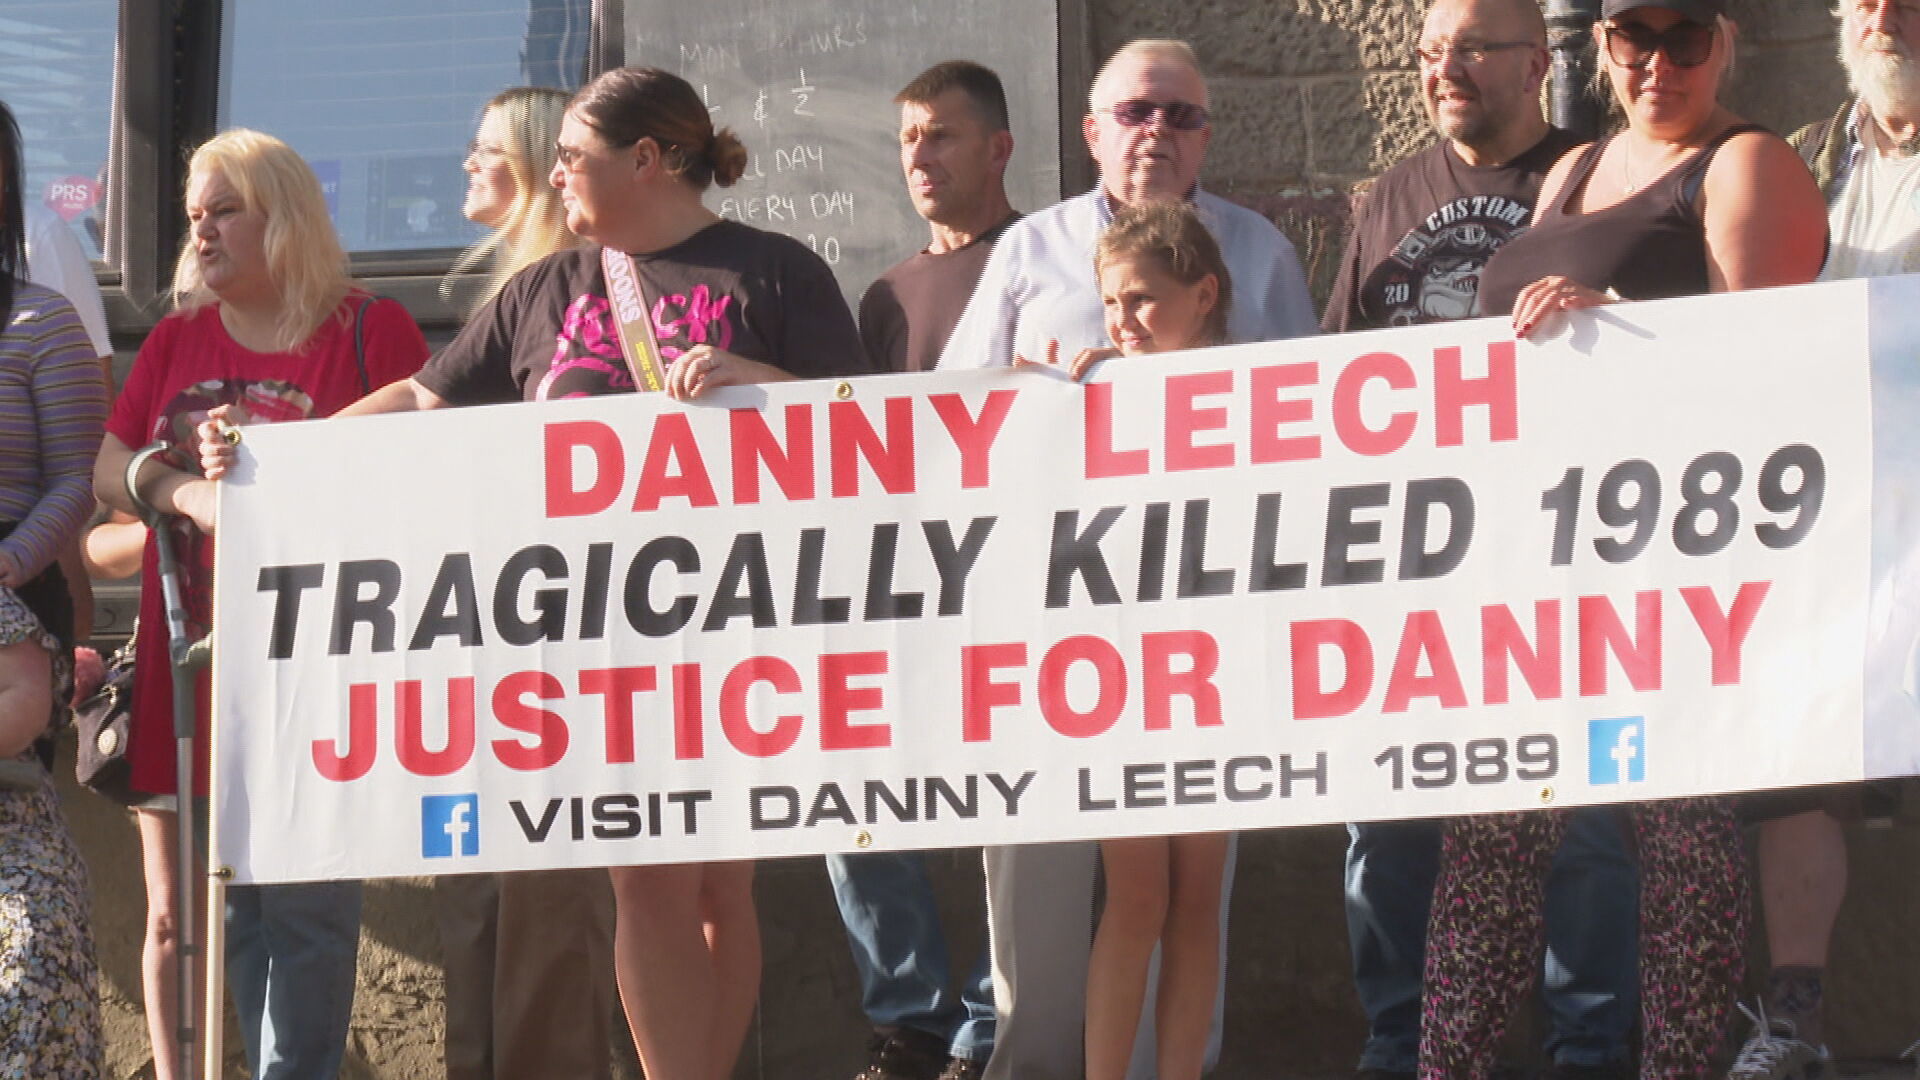 The local community has rallied in support of Danny Leech's family